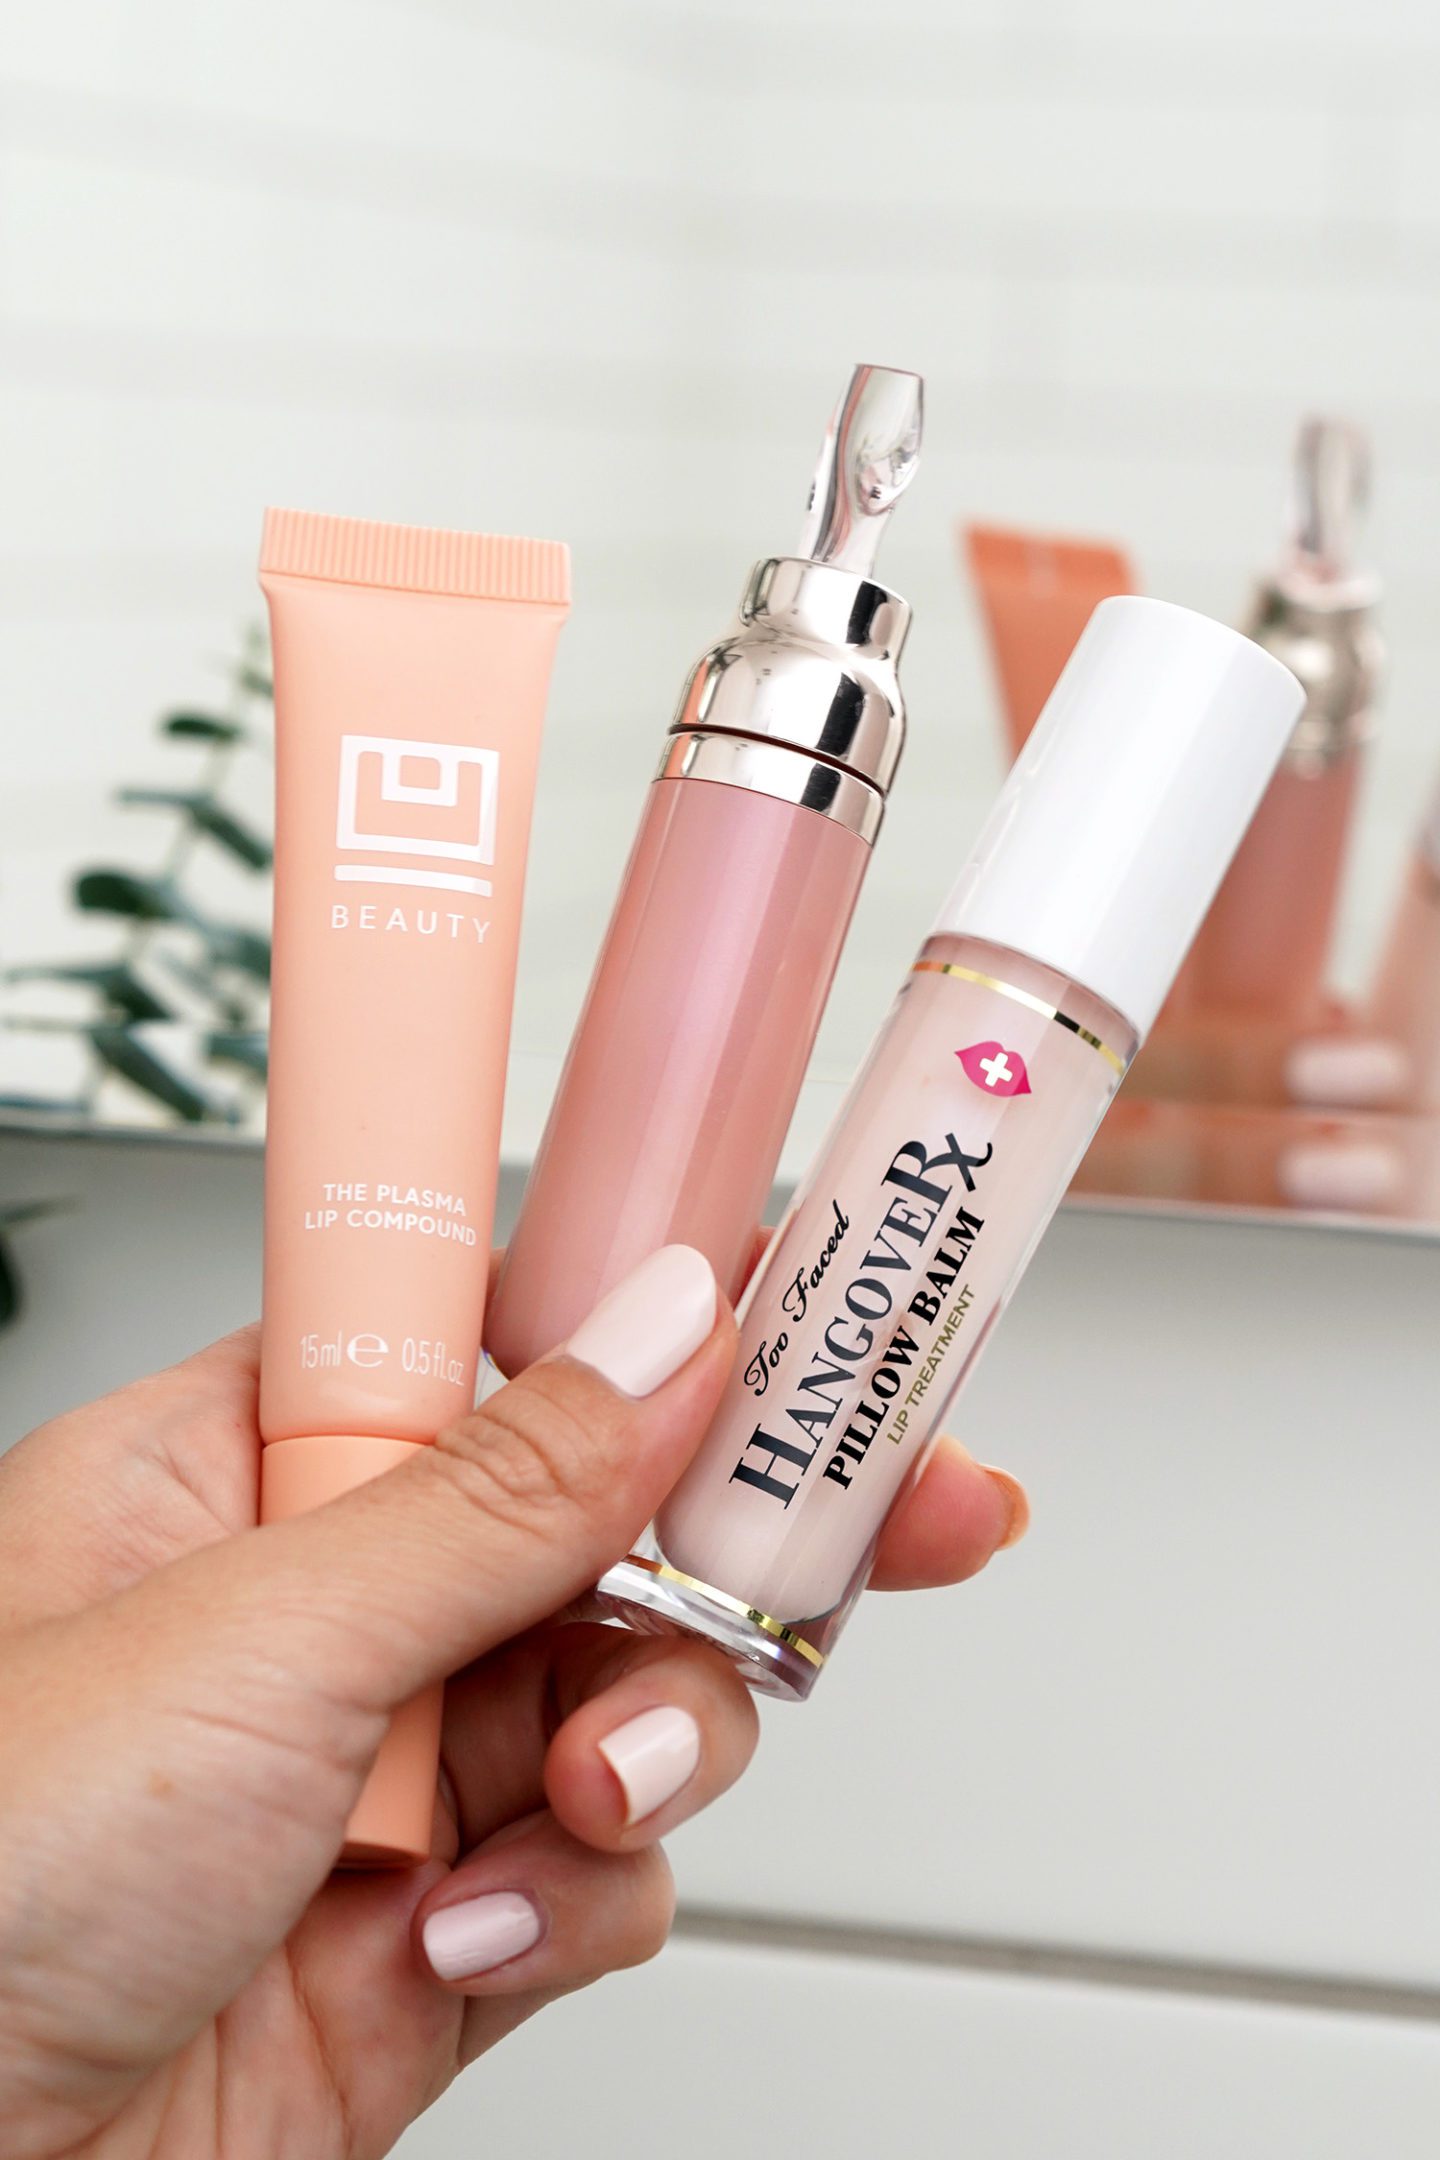 Favorite Clear Lip Balms You Beauty, La Mer and Too Faced